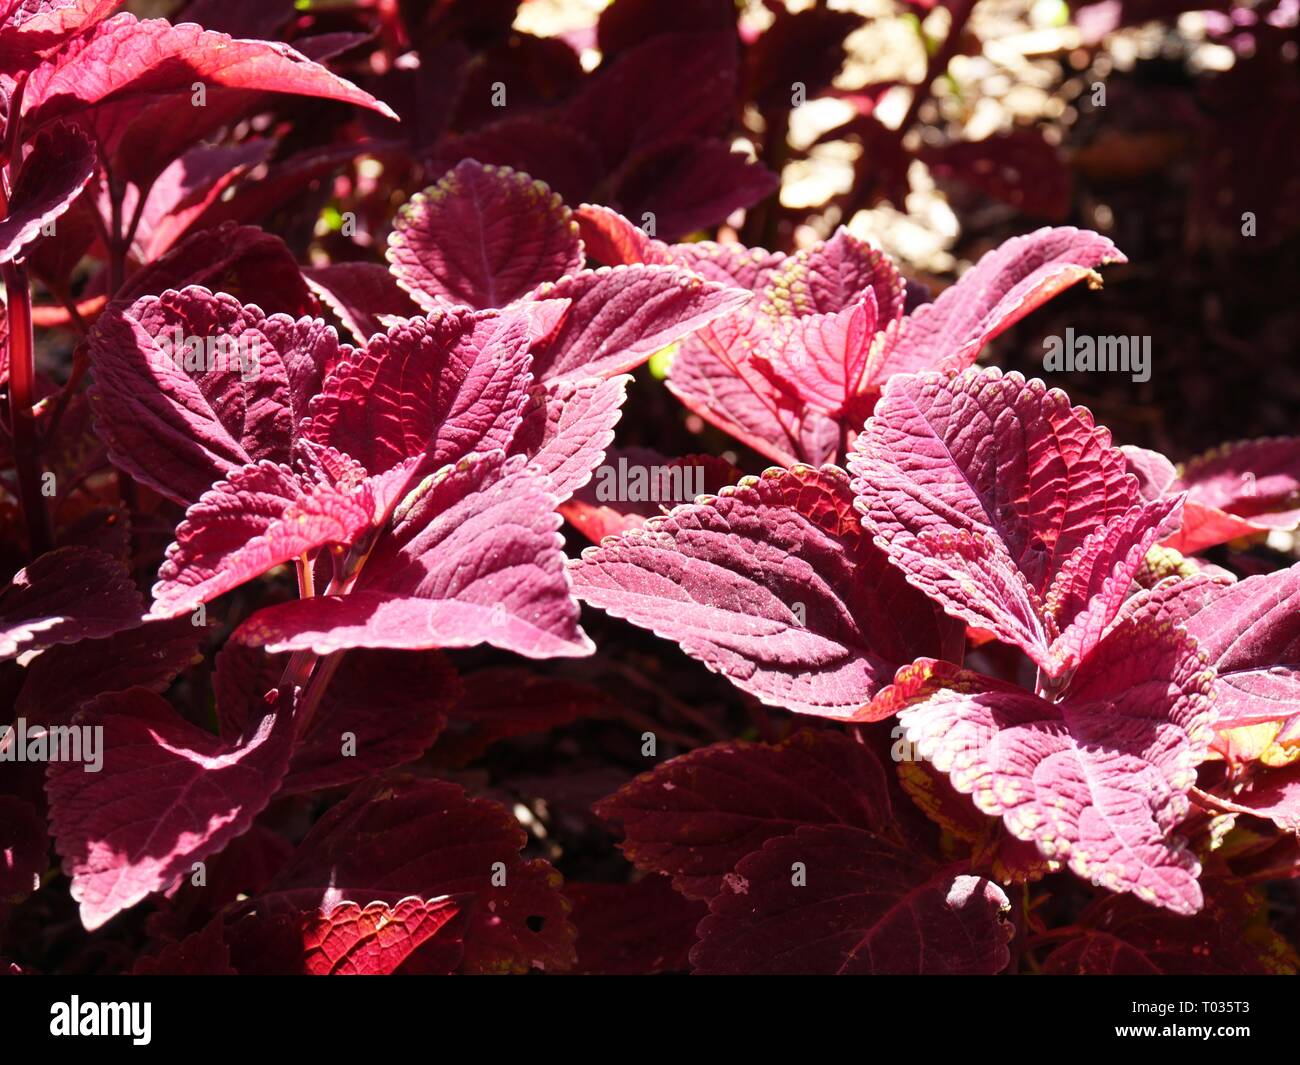 Maroon mayana leaves growing in a garden Stock Photo